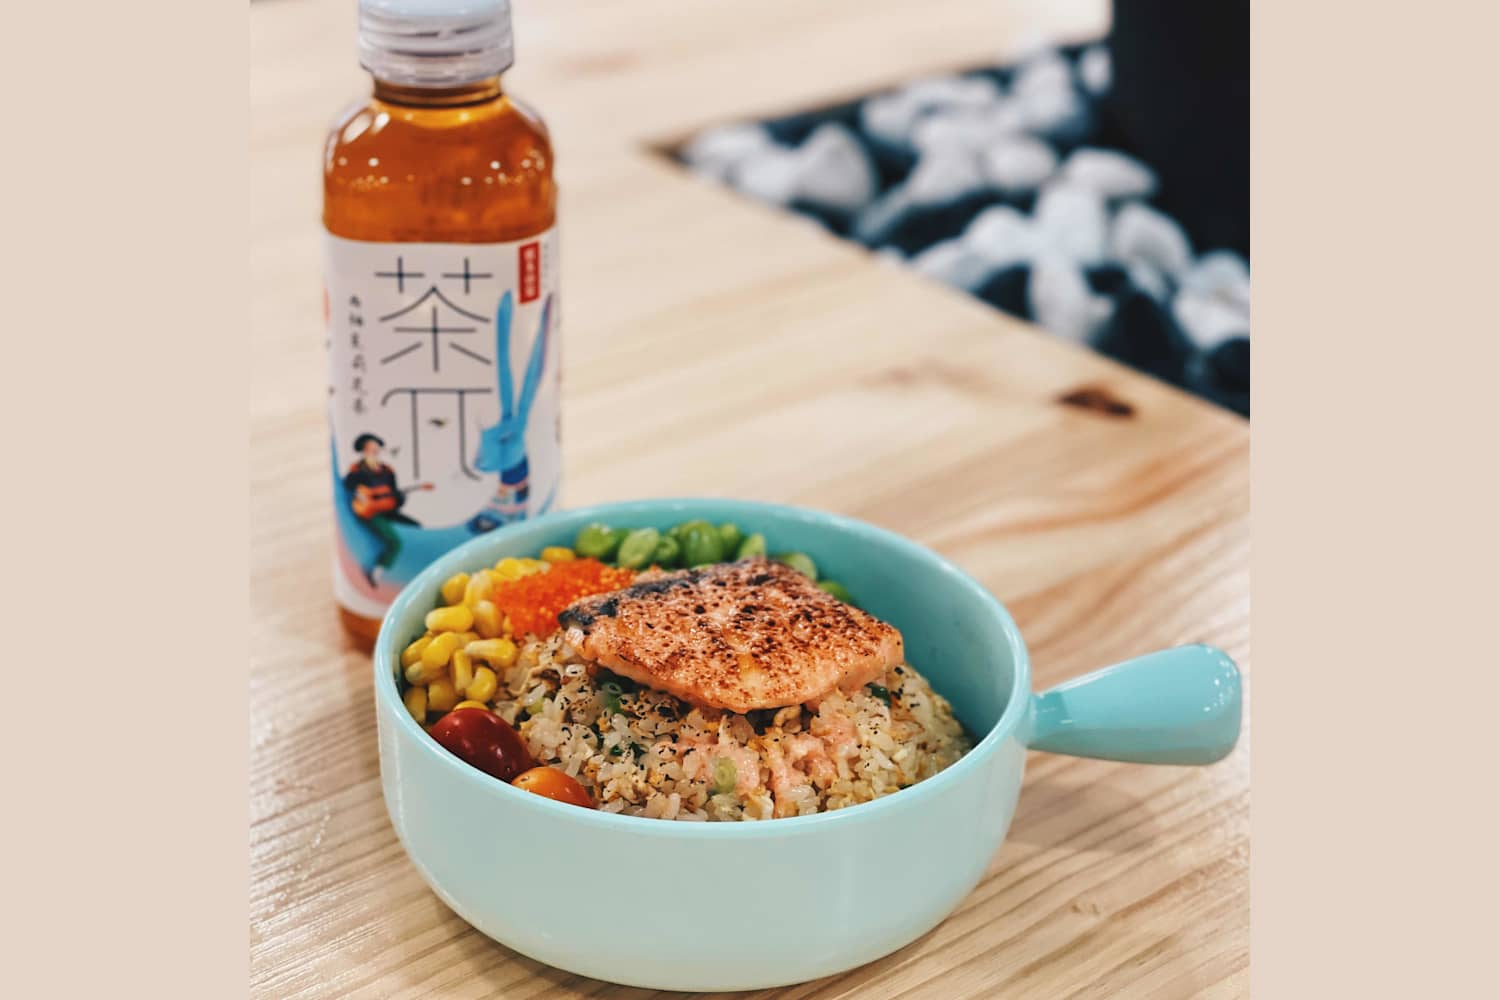 1 x Mentaiko Salmon Fried Rice + Drink Set [Exclusive Deal] at Bowl & Bowl - Get Deals, Cashback and Rewards with ShopBack GO